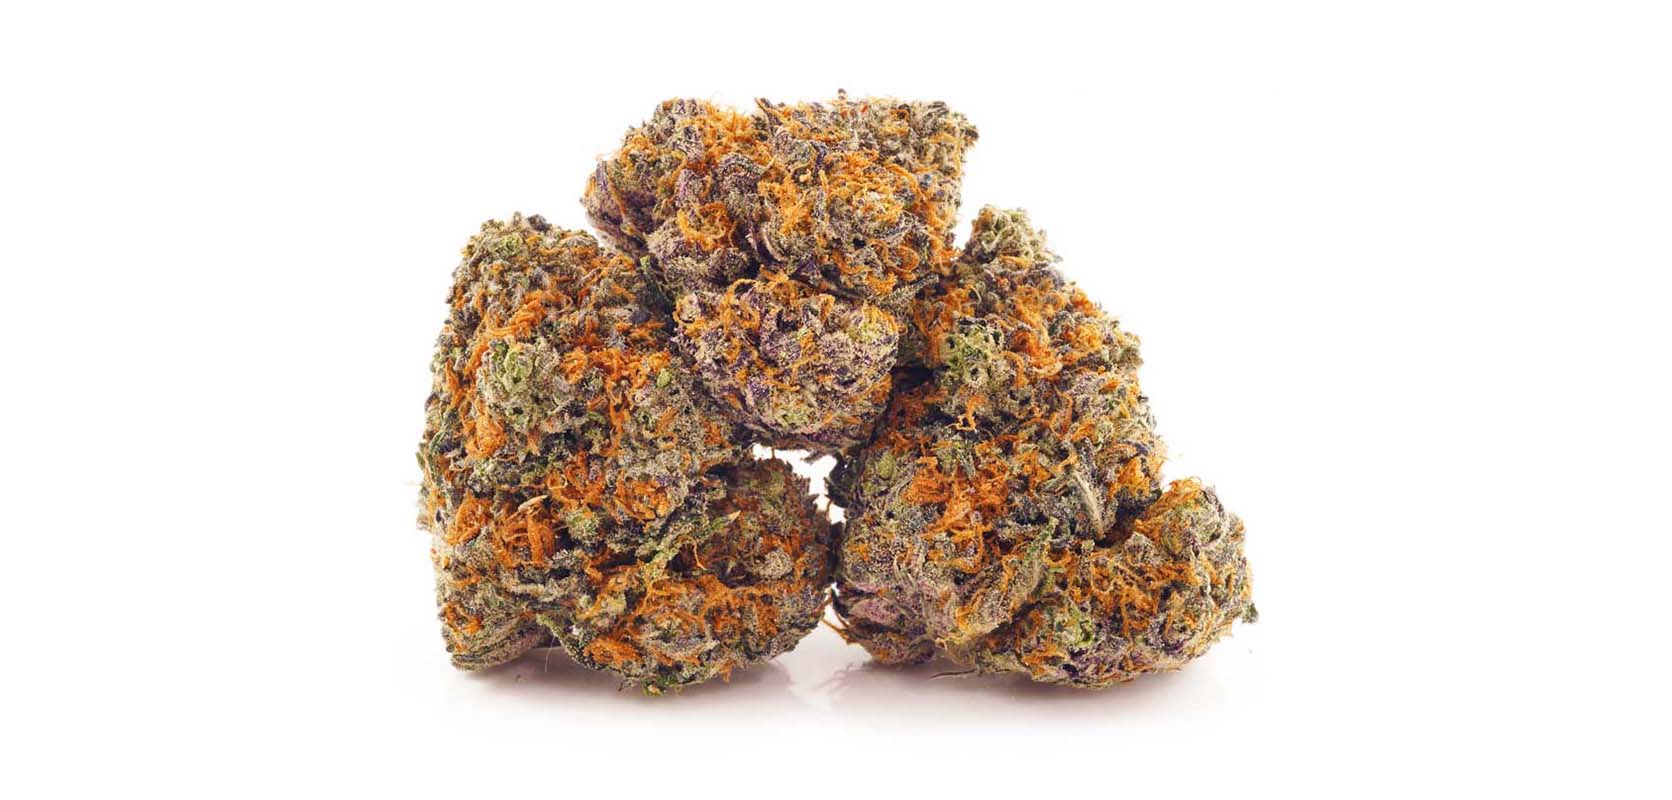 Incredible Hulk budget bud for sale at Low Price Bud online weed dispensary and mail order marijuana weed store. Buy weed online Canada. 